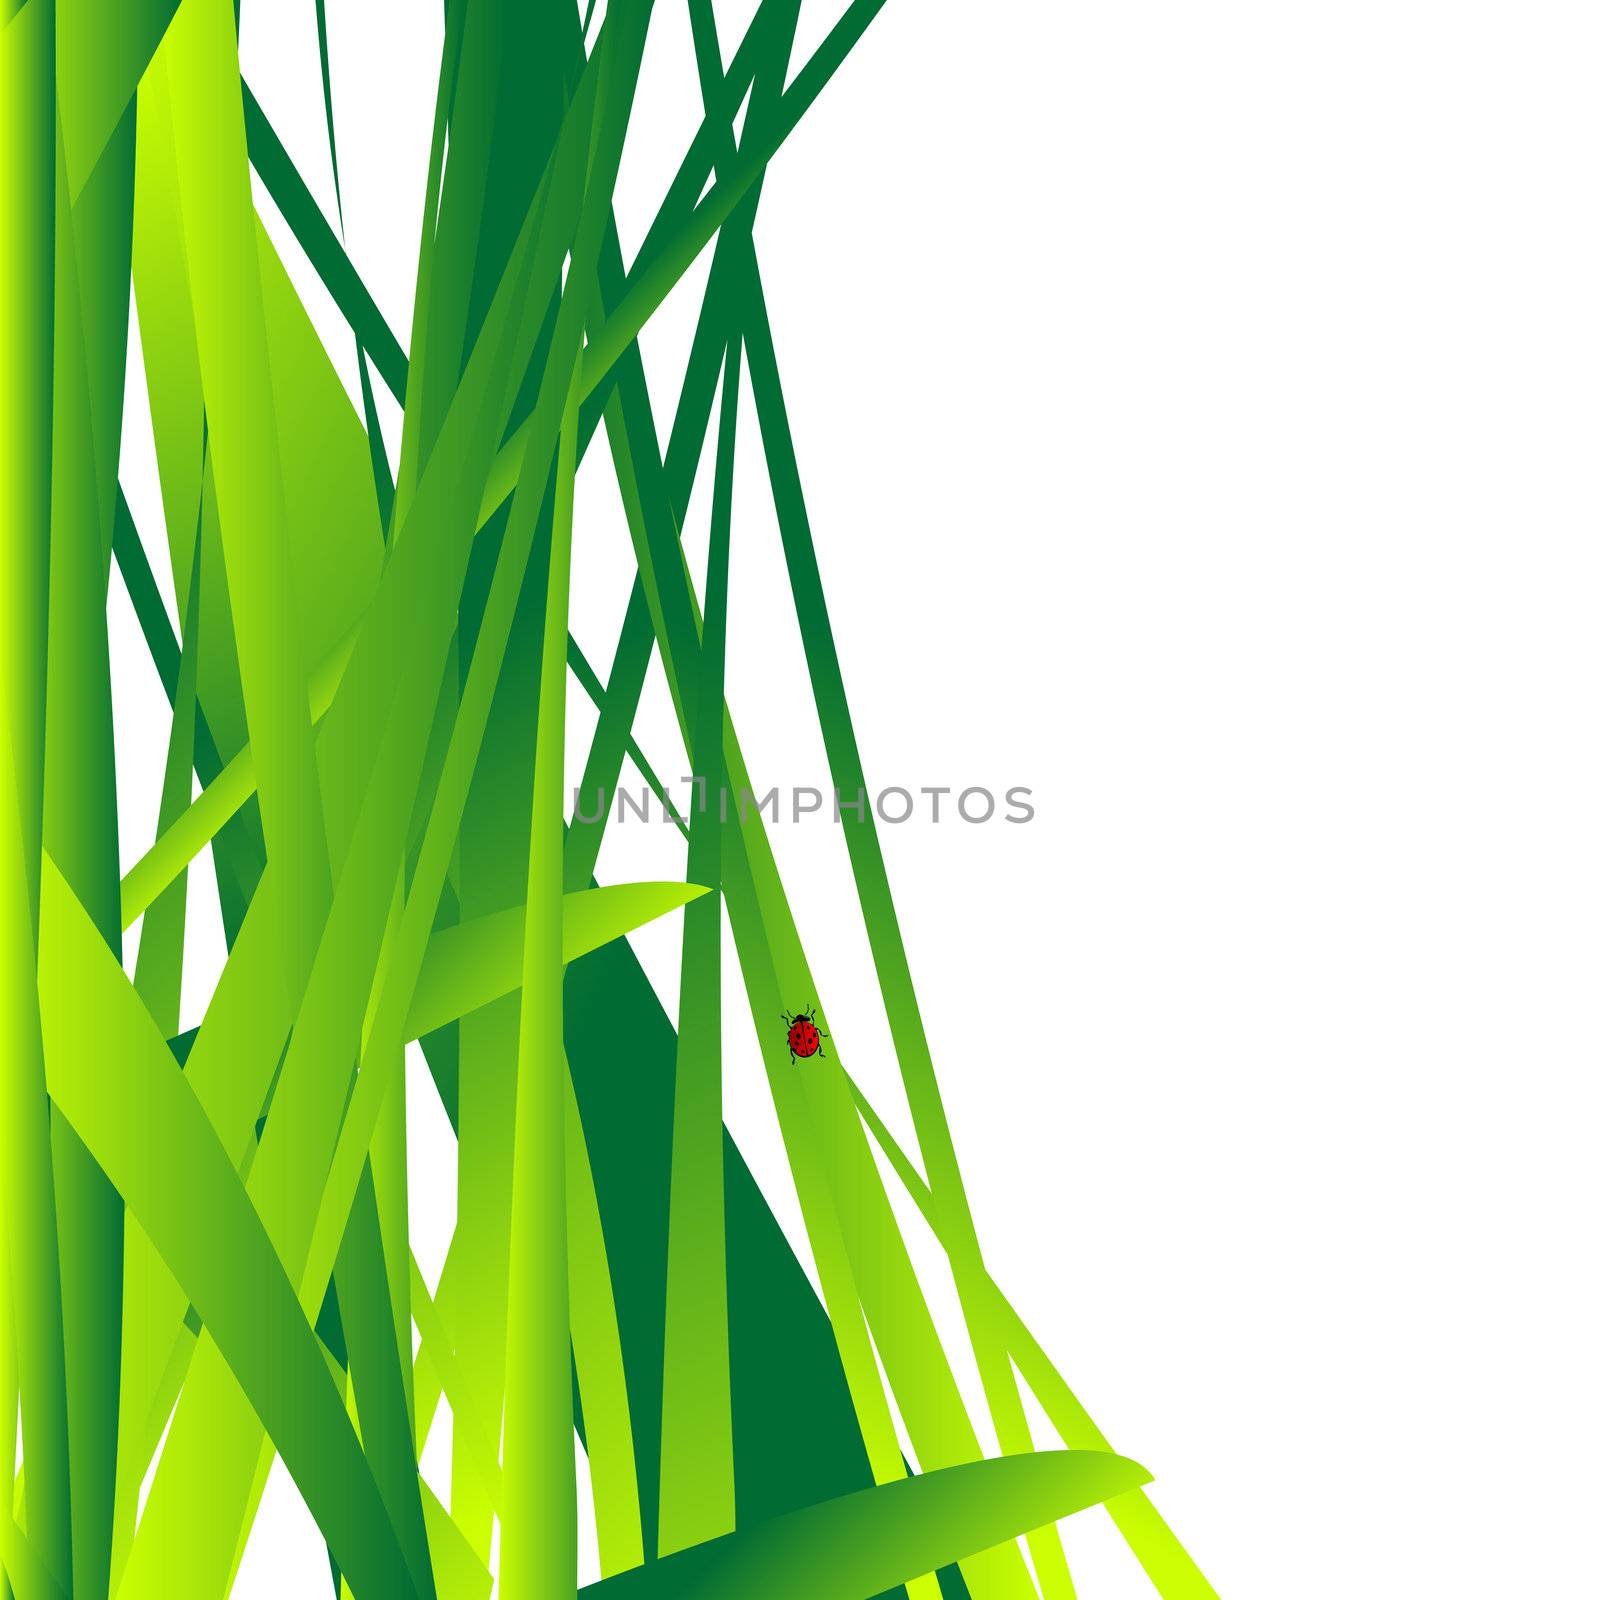 Background with fresh grass leaves and a little ladybug